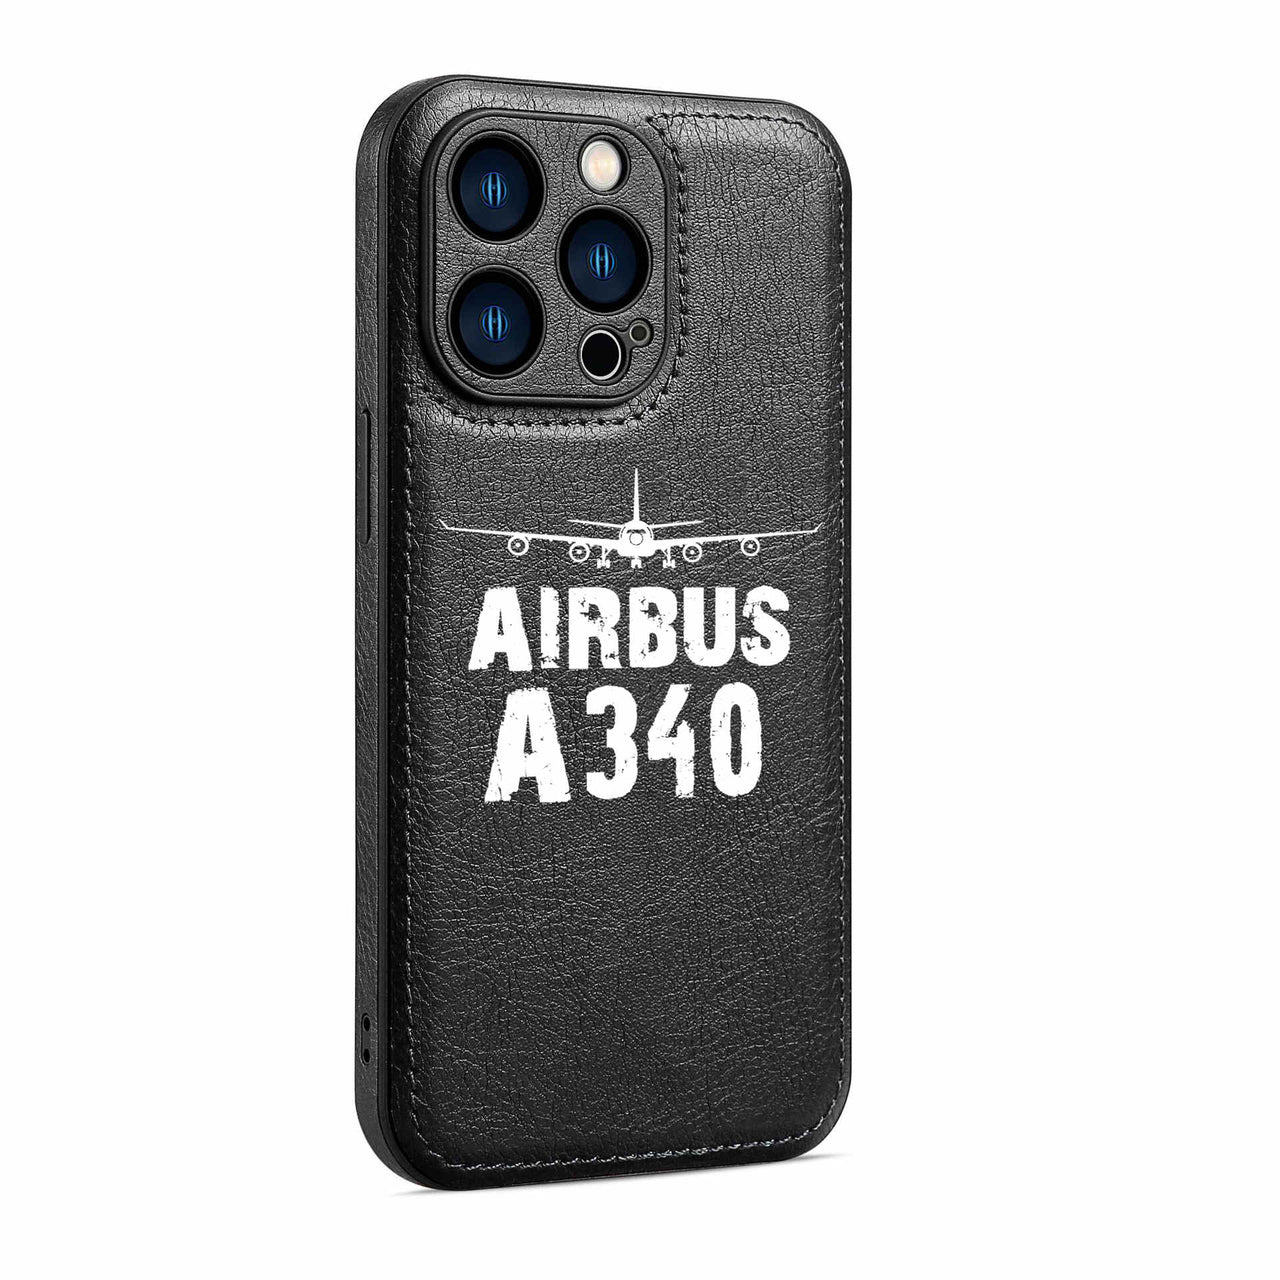 Airbus A340 & Plane Designed Leather iPhone Cases